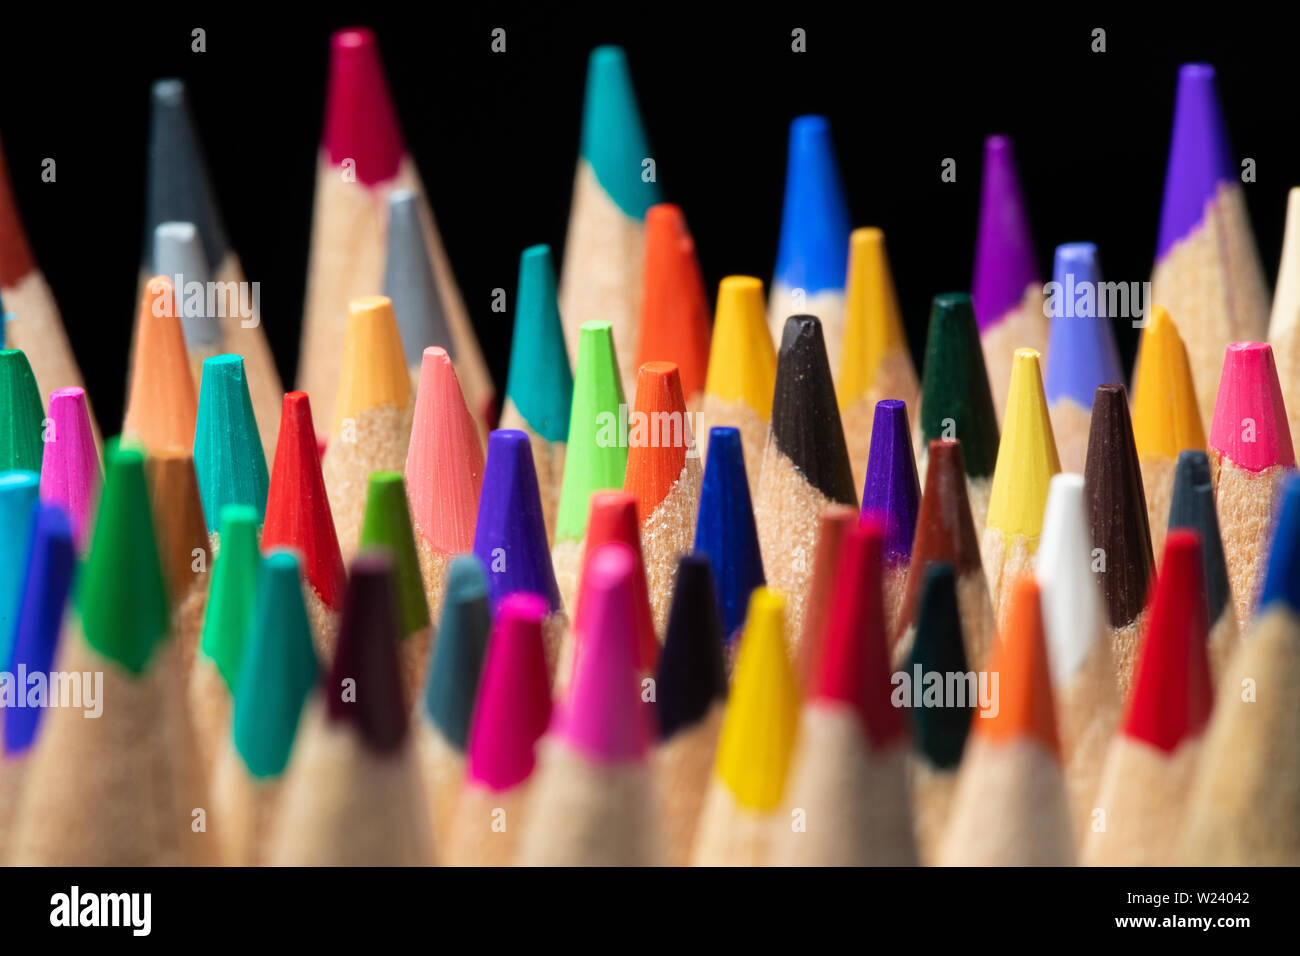 A set of colored pencils for drawing macro photography. Stock Photo